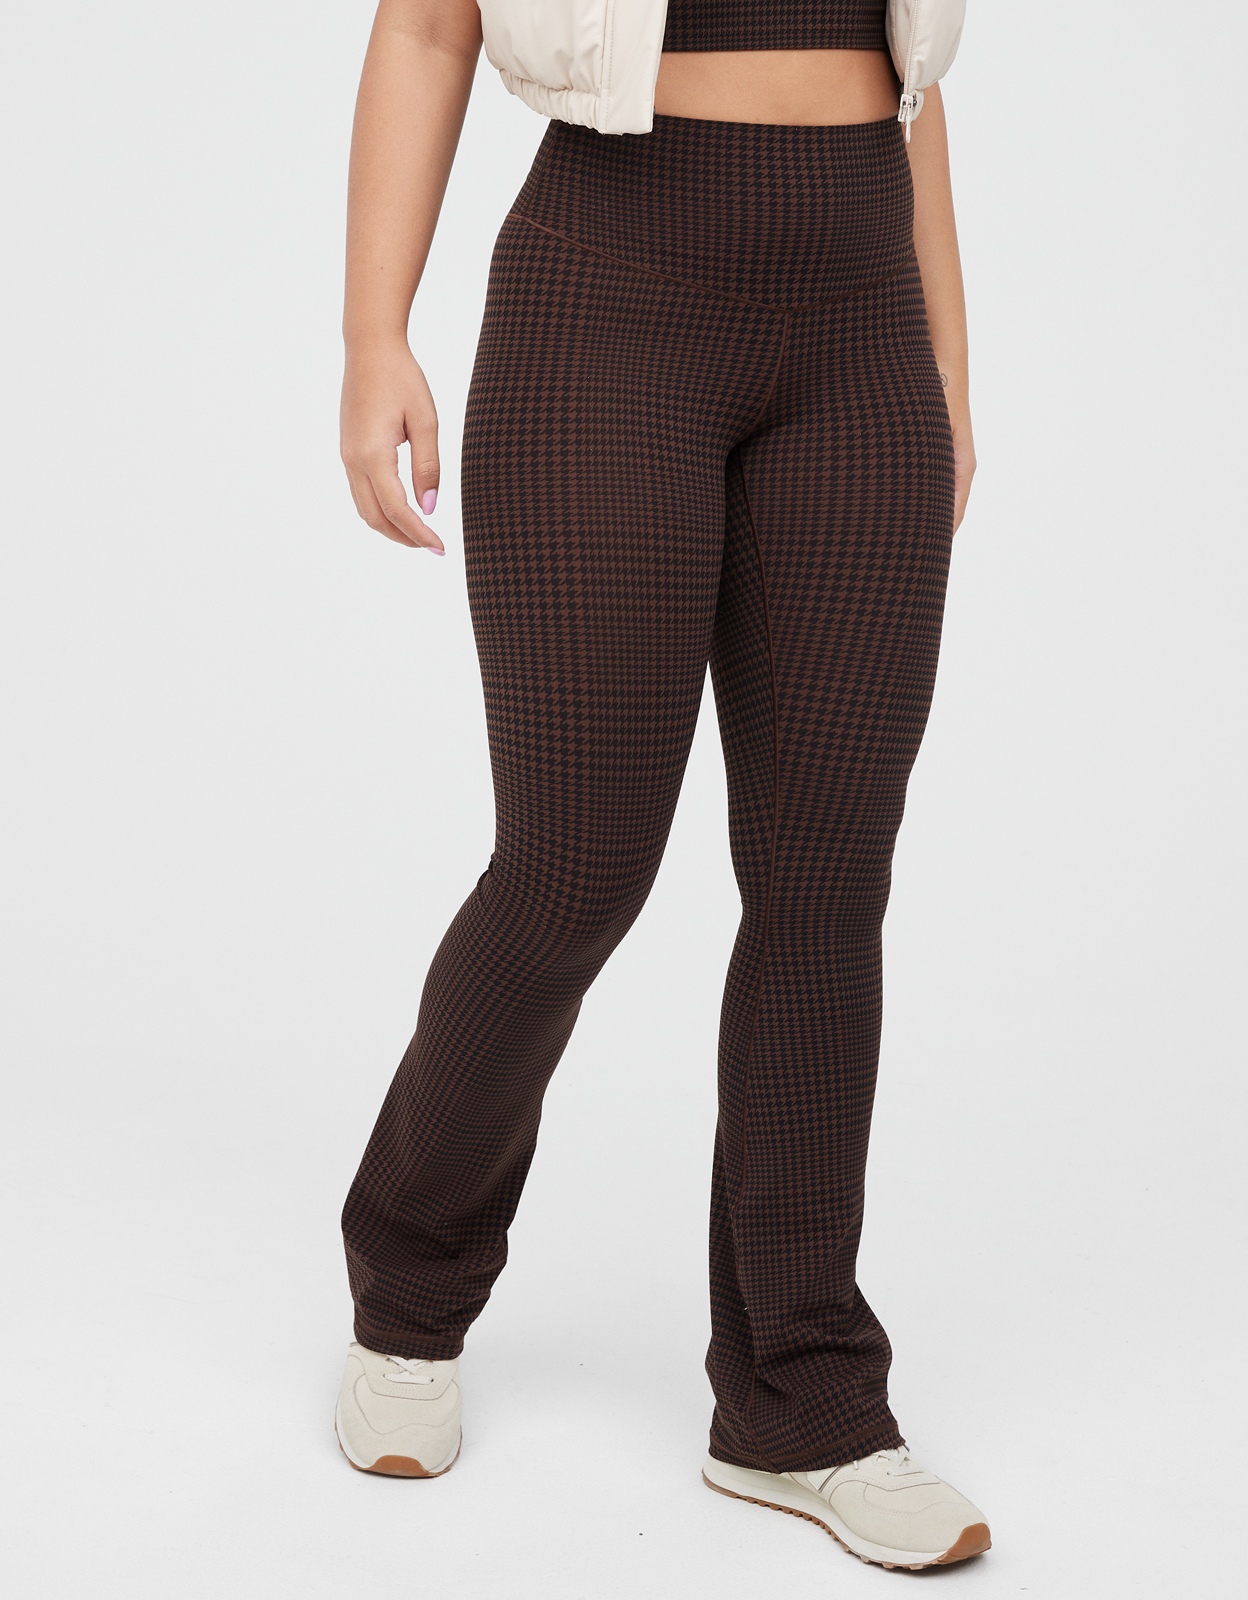 Shop OFFLINE By Aerie Real Me Xtra Bootcut Legging online